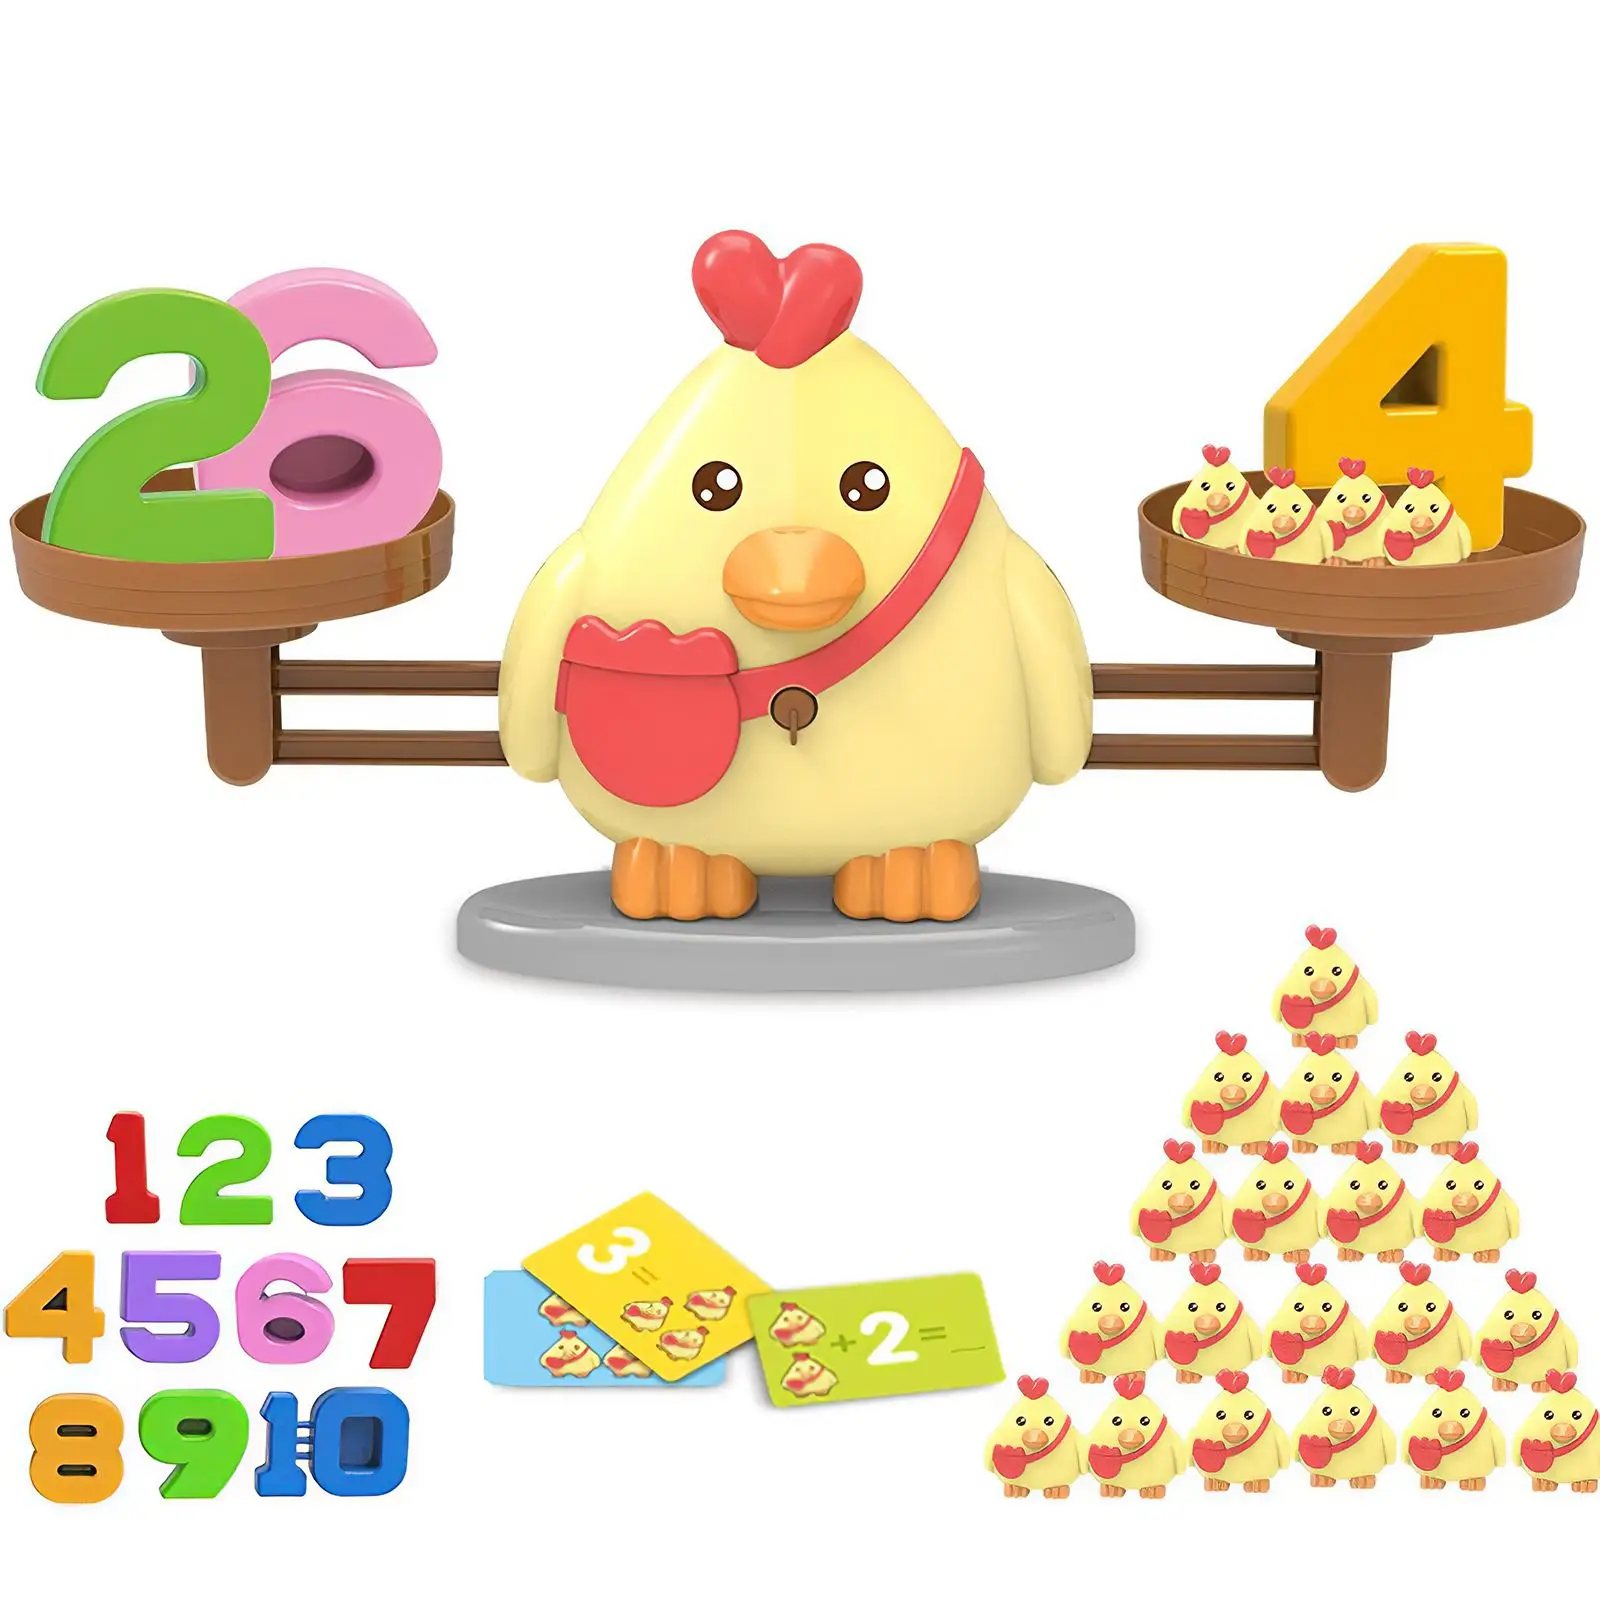 

Play Brainy Balancing Chicken Game Fun And Educational Chicken Scale Math Toy Cute Numbers Counting Game For Girls And Boys